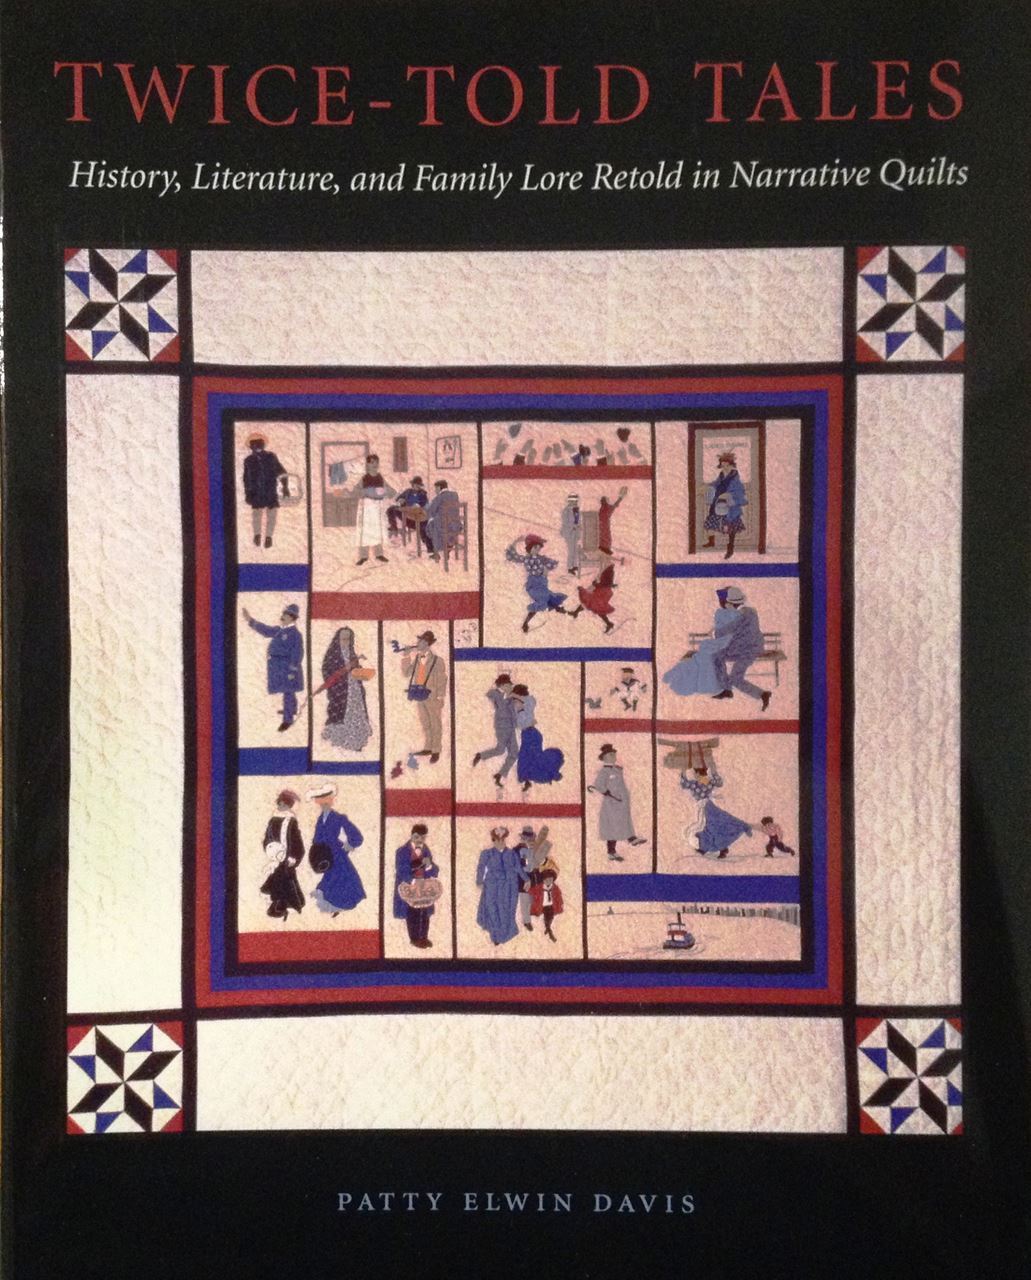 Cover of Twice-Told Tales History, Literature, and Family Lore Retold in Narrative Quilts" By Patty Elwin Davis. Cover is black with an image of a quilt in the center.